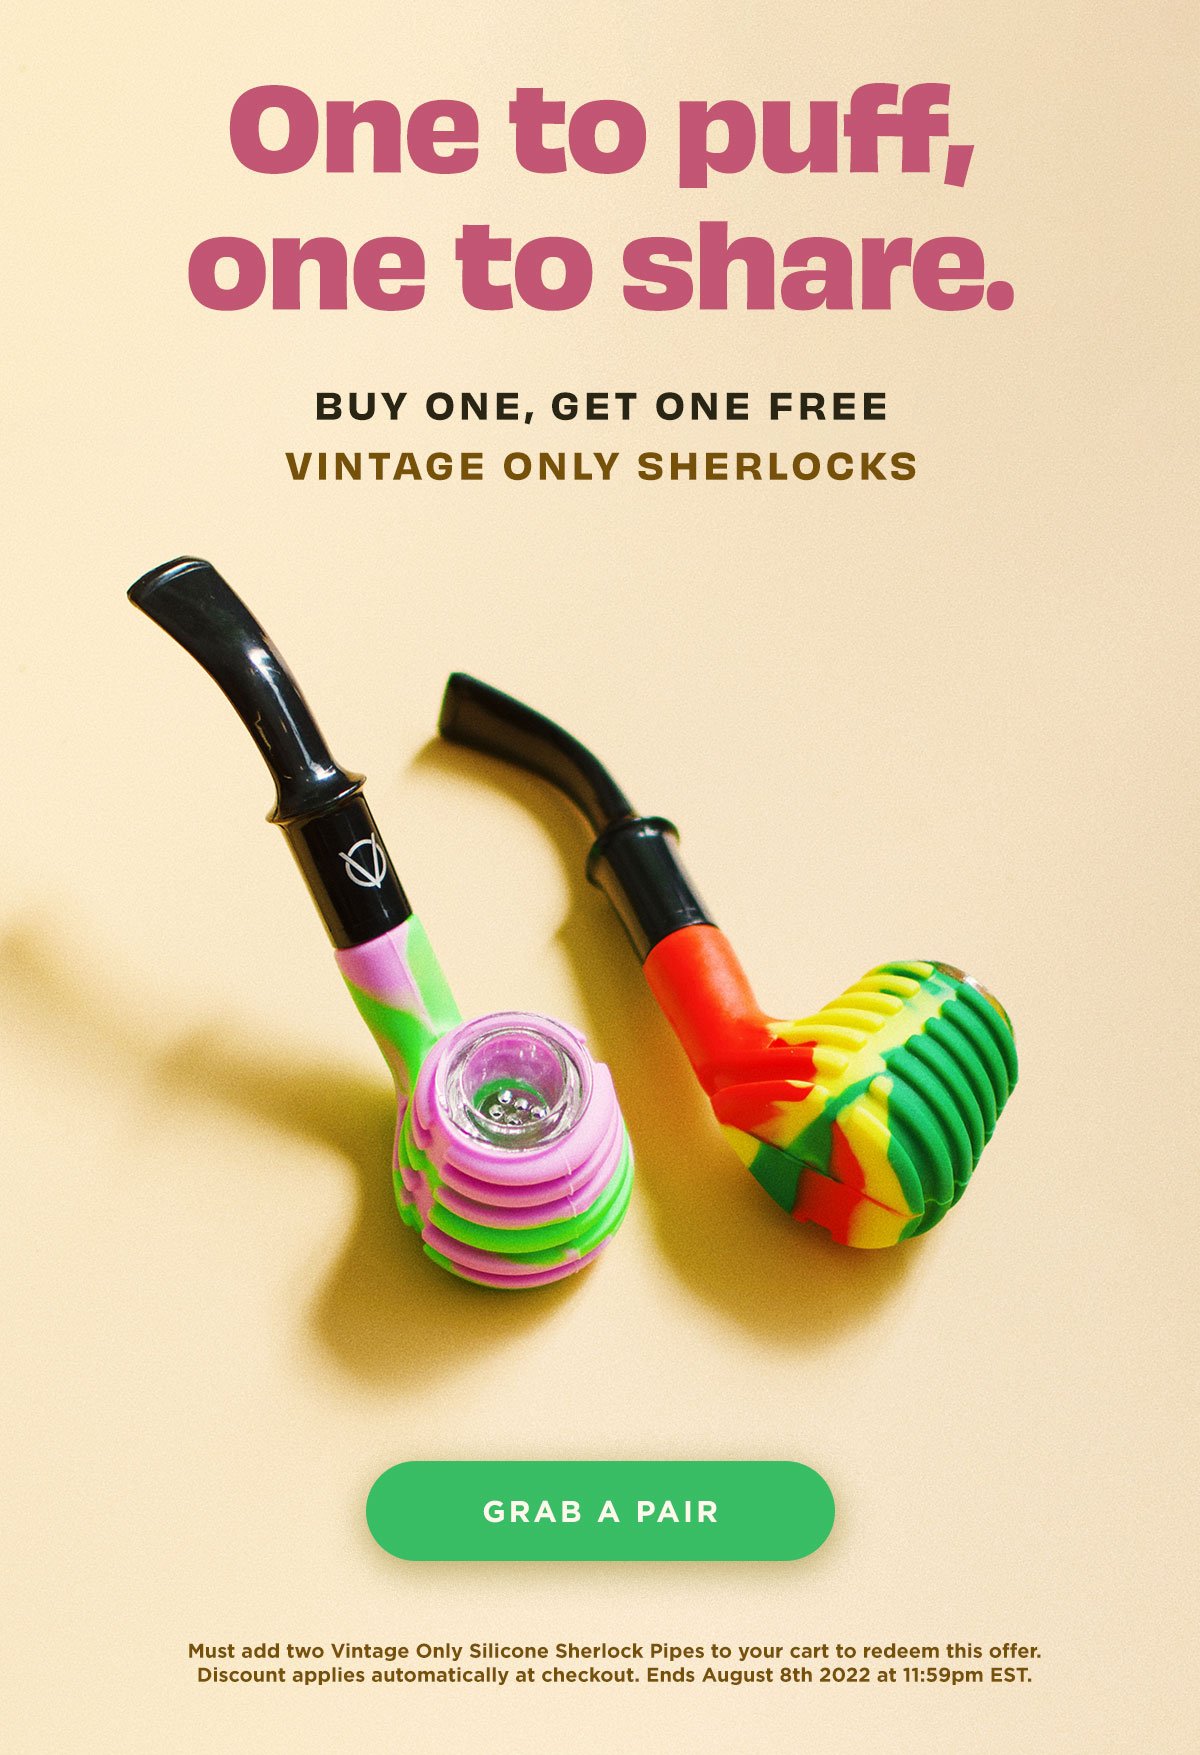 Limited time only: buy one, get one free Vintage Only Silicone Sherlock Pipes